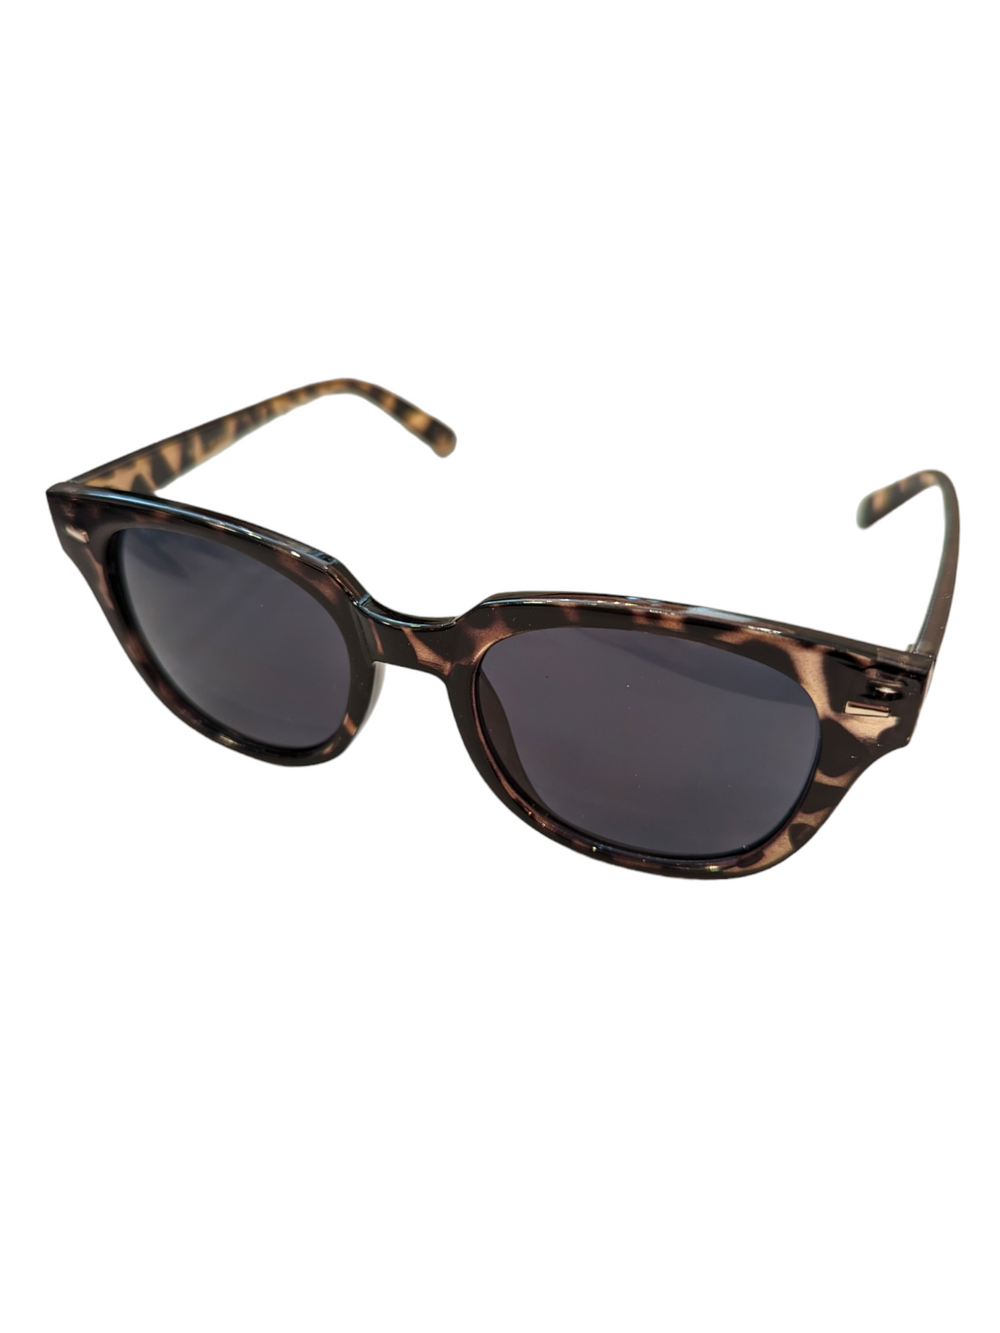 perfect vacation sunglasses in tortoise